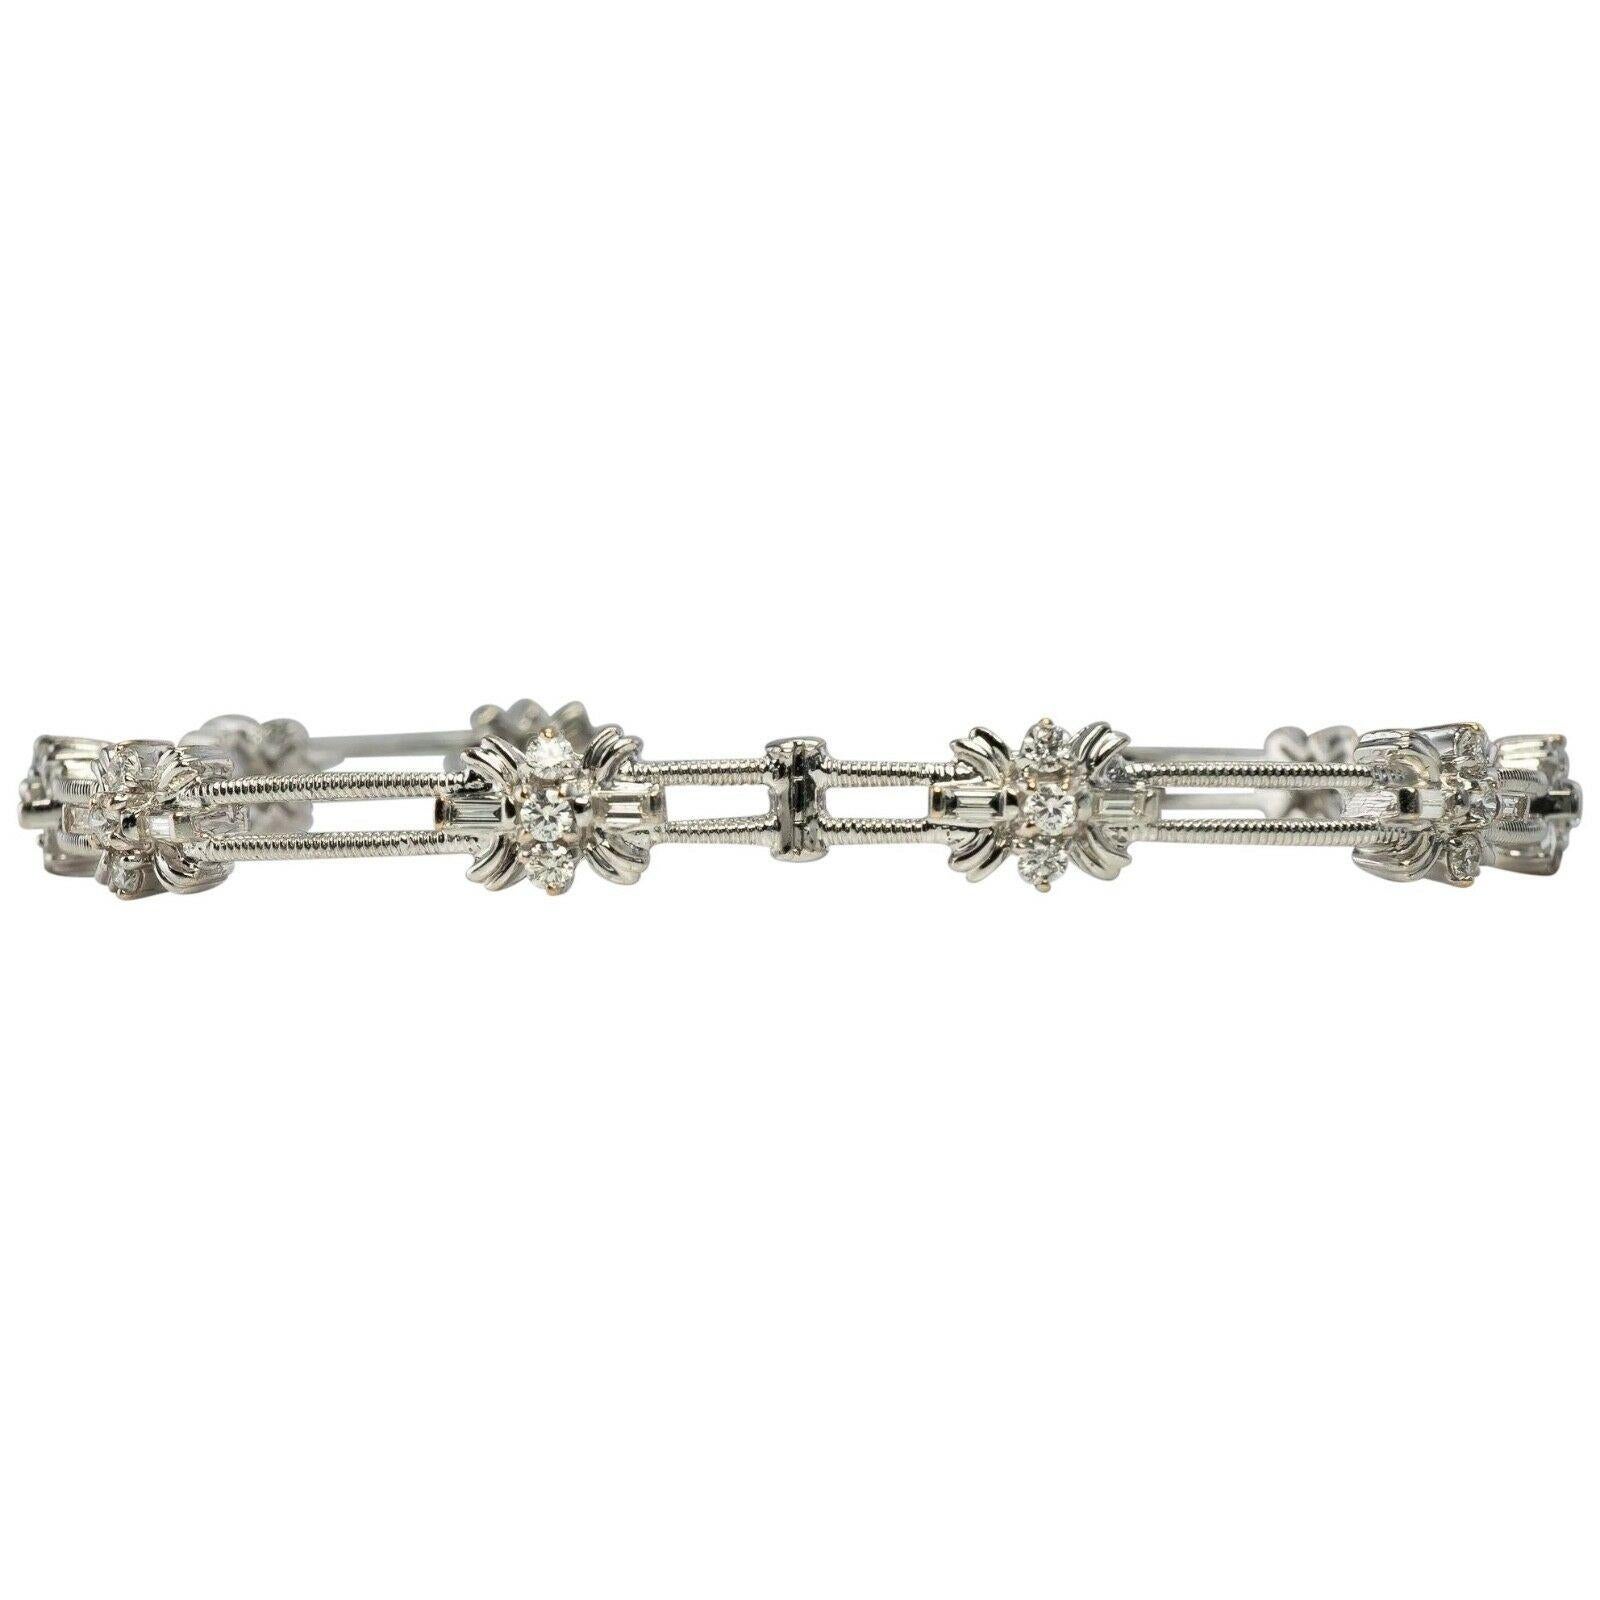 This beautiful estate bracelet is finely crafted in solid 14K White Gold (carefully tested and guaranteed). Each flower-like links holds three round brilliant cut diamonds and two diamond baguettes. The diamonds are estimated to be VVS2 clarity and